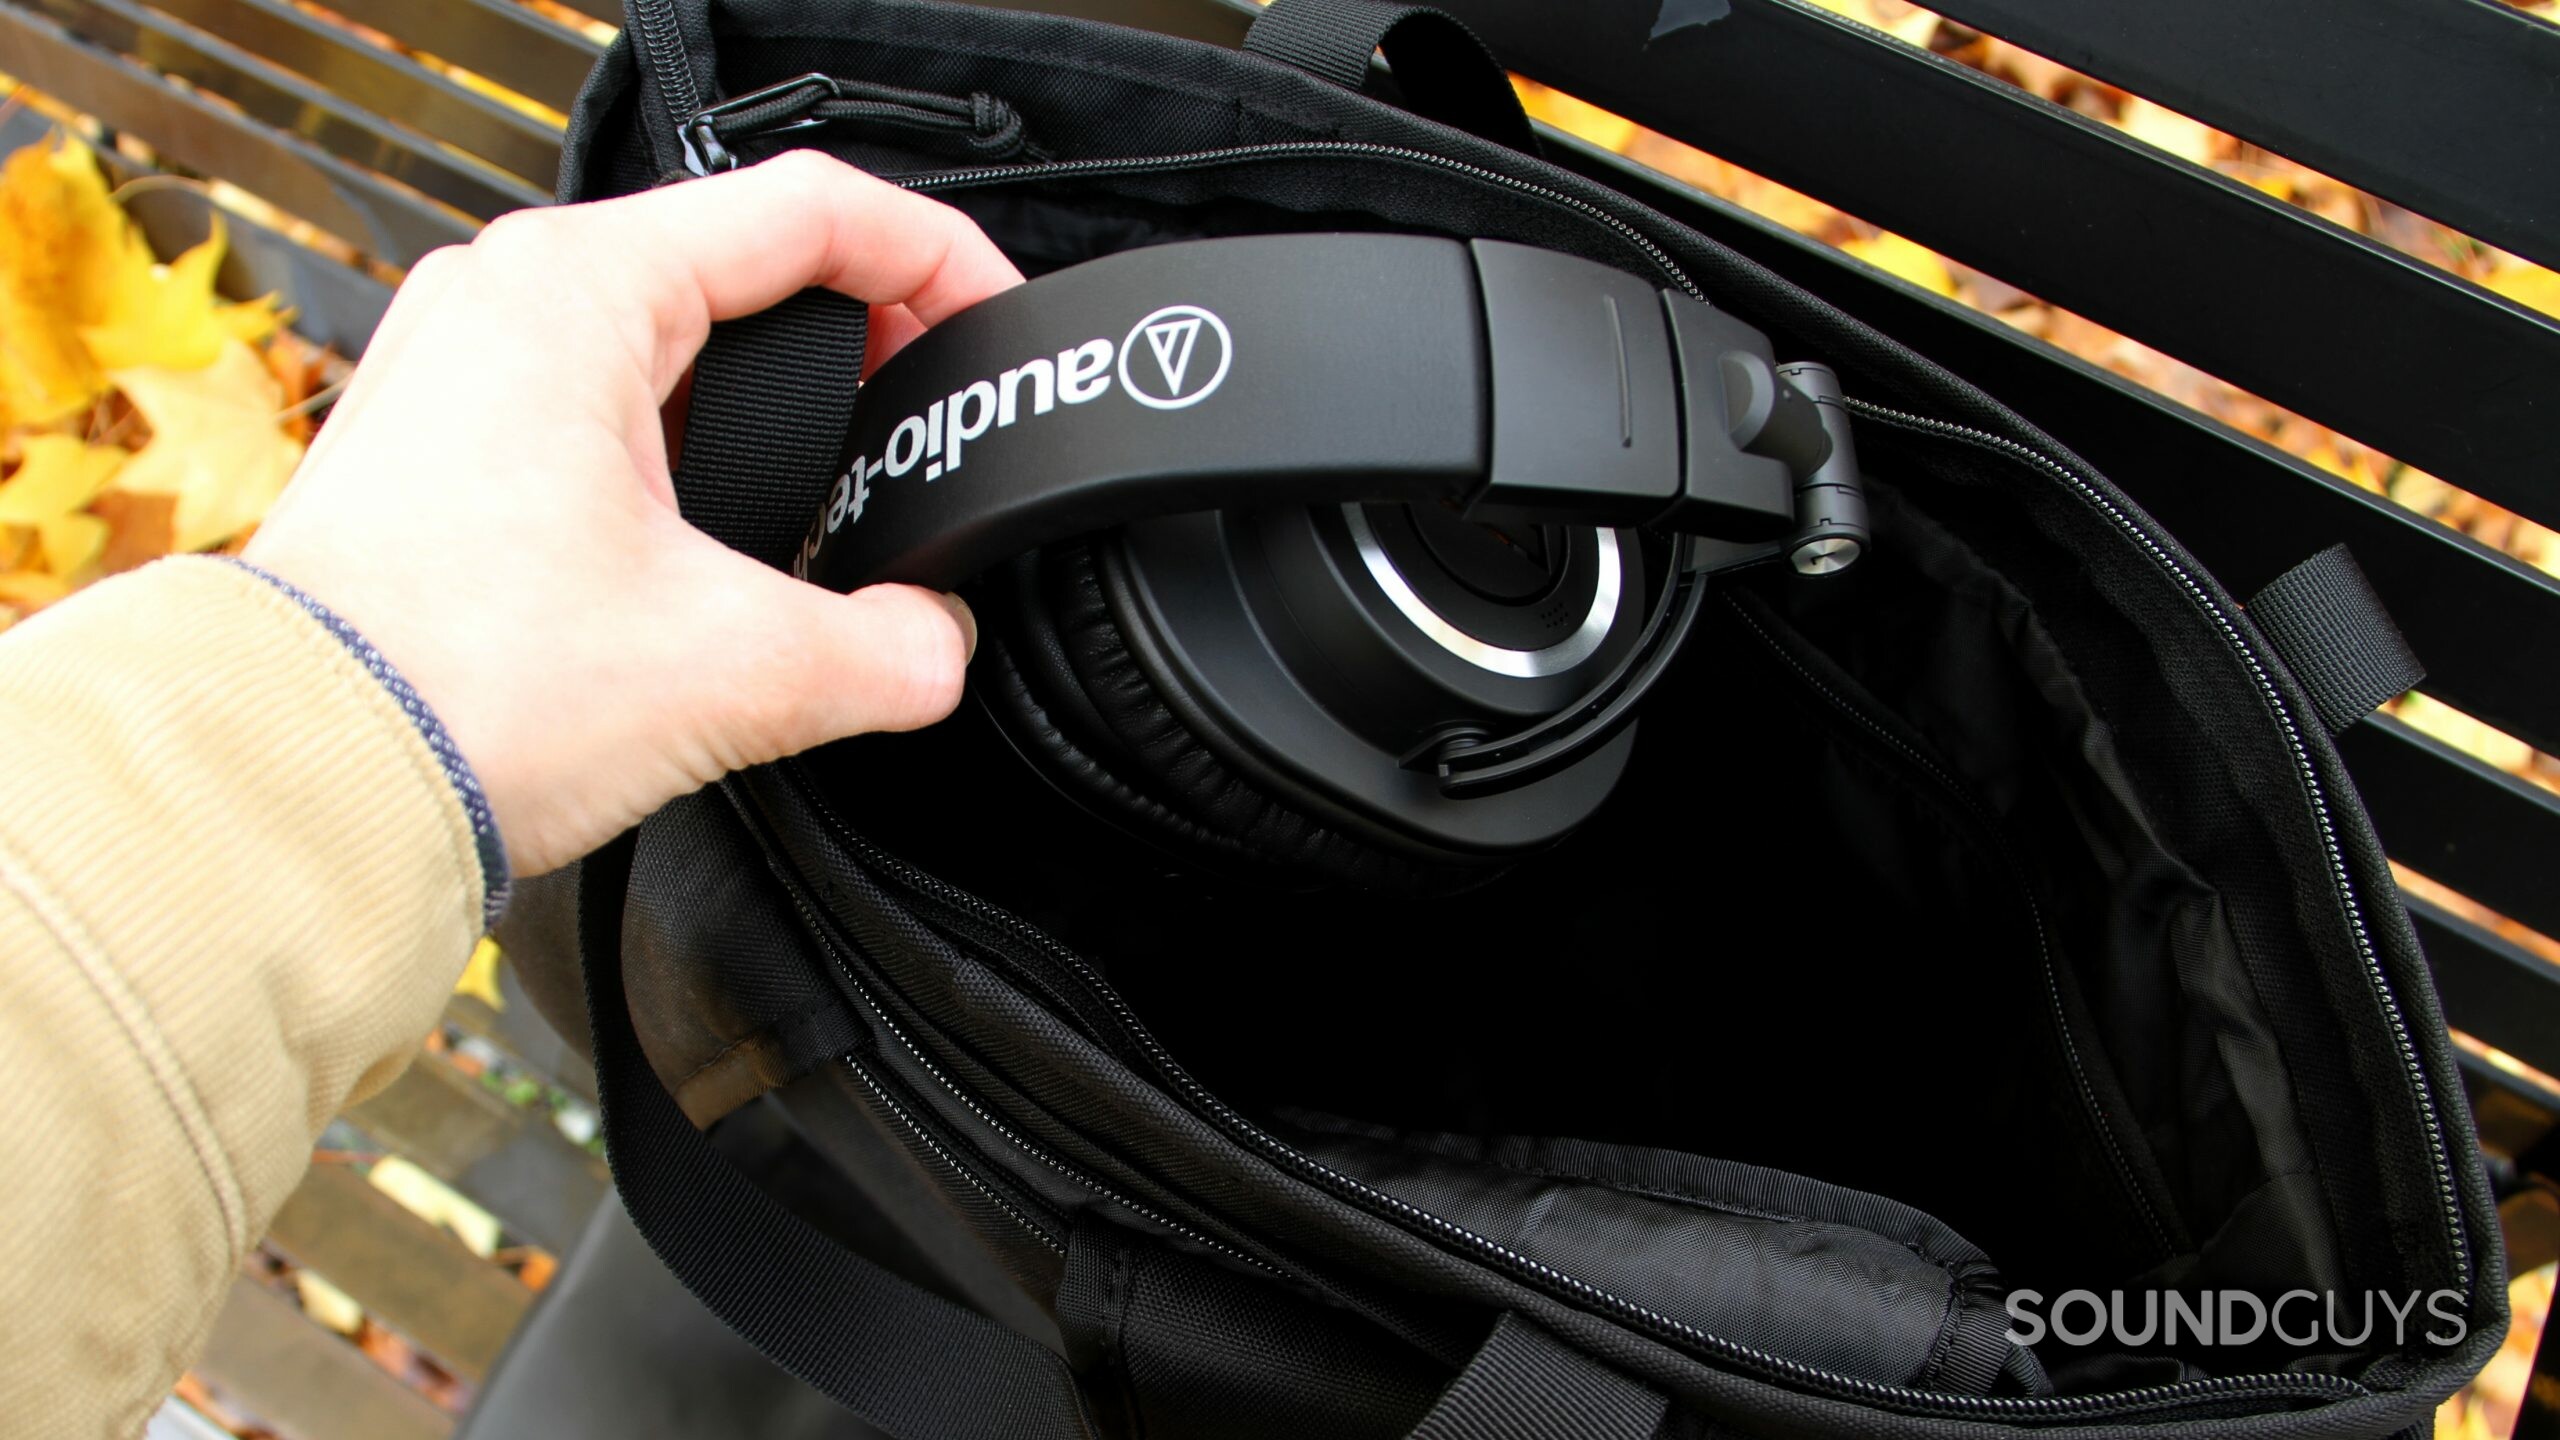 Audio-Technica ATH-M50xBT2 getting stowed away in a black bag.